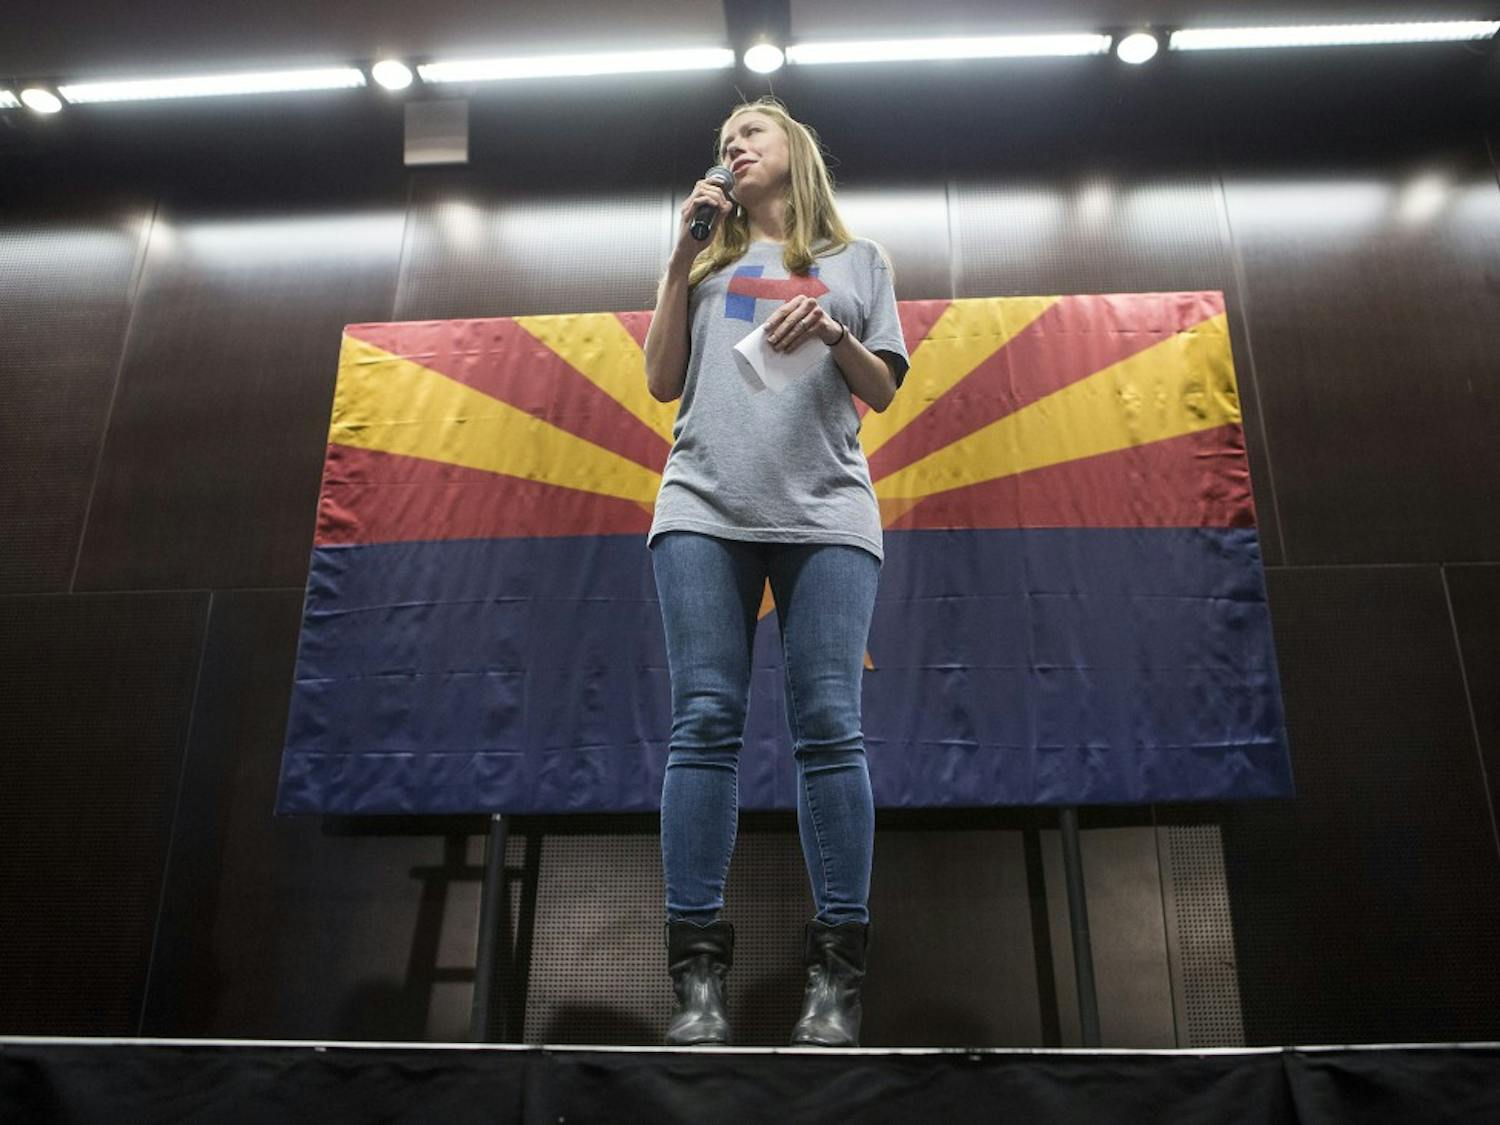 Photo Gallery: Chelsea Clinton stumps for Hillary Clinton at Tempe campaign stop